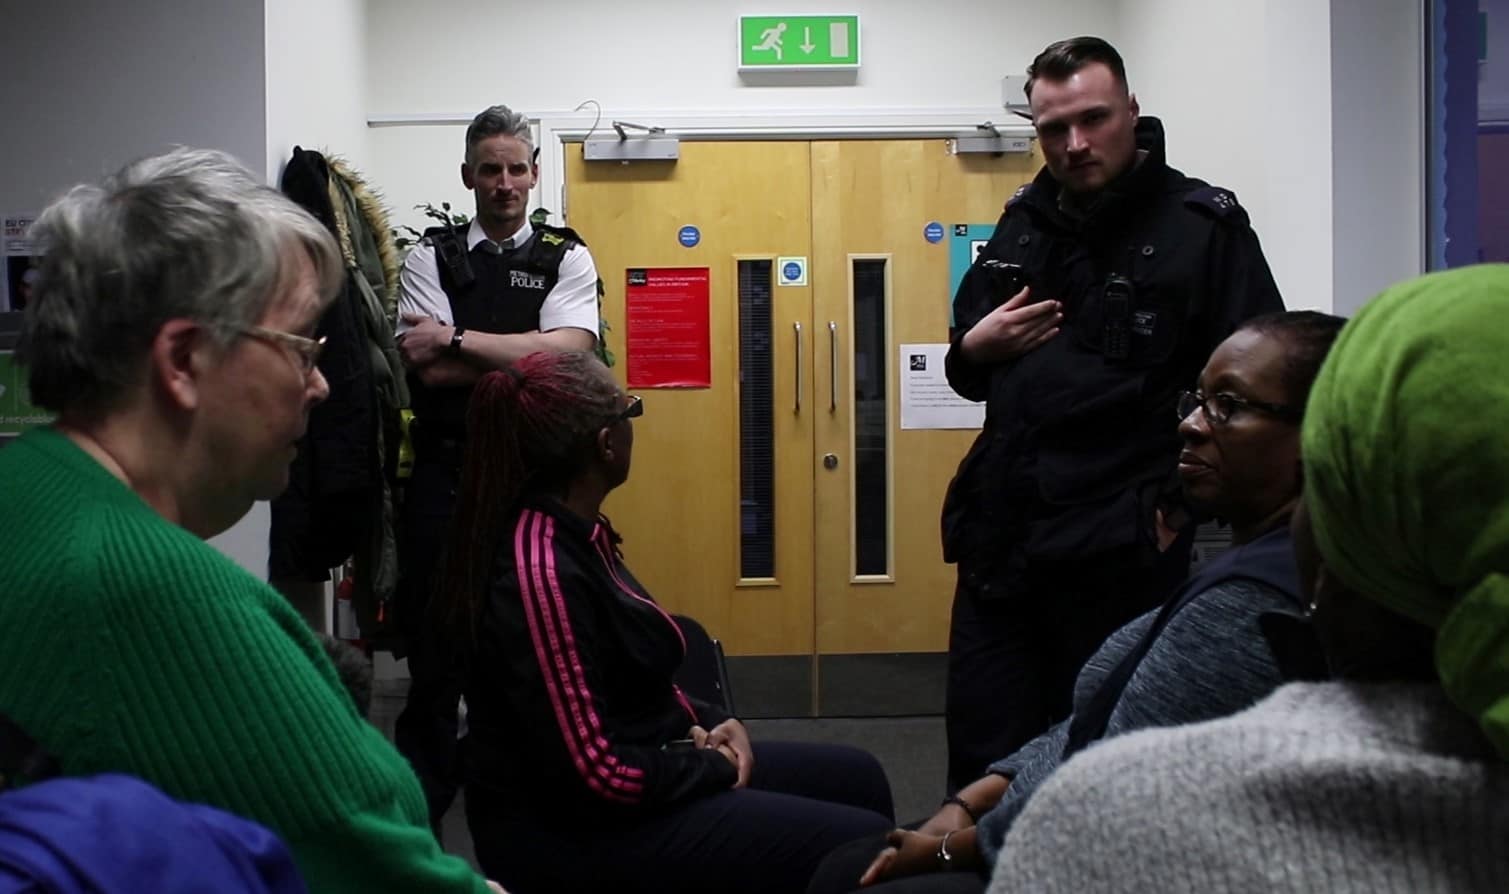 Fed-up residents staged the sit-in protest after their Zumba class was cancelled